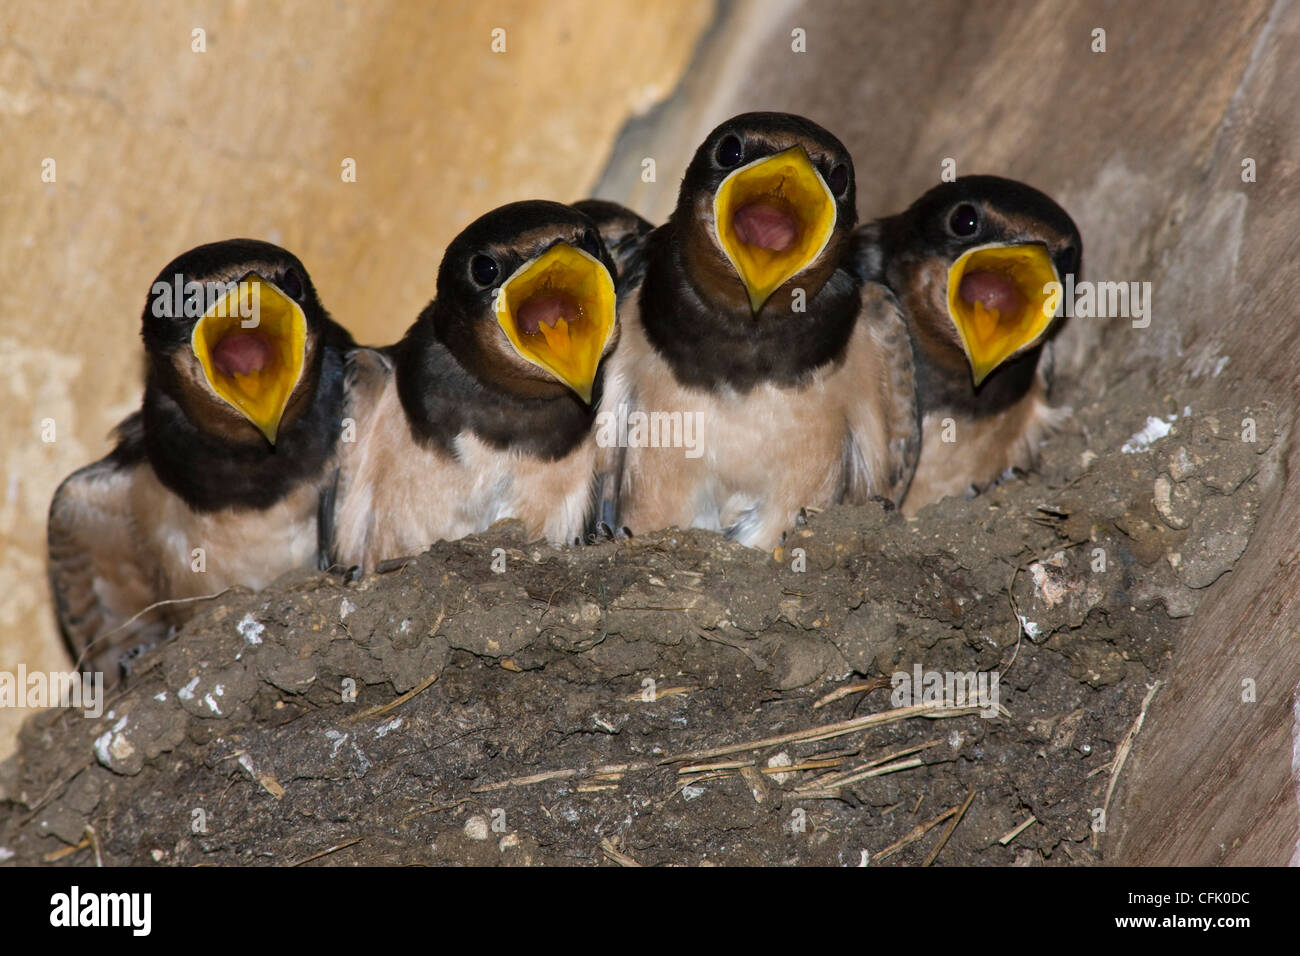 Baby swallows in the nest, calling for food from the mother bird Stock Photo